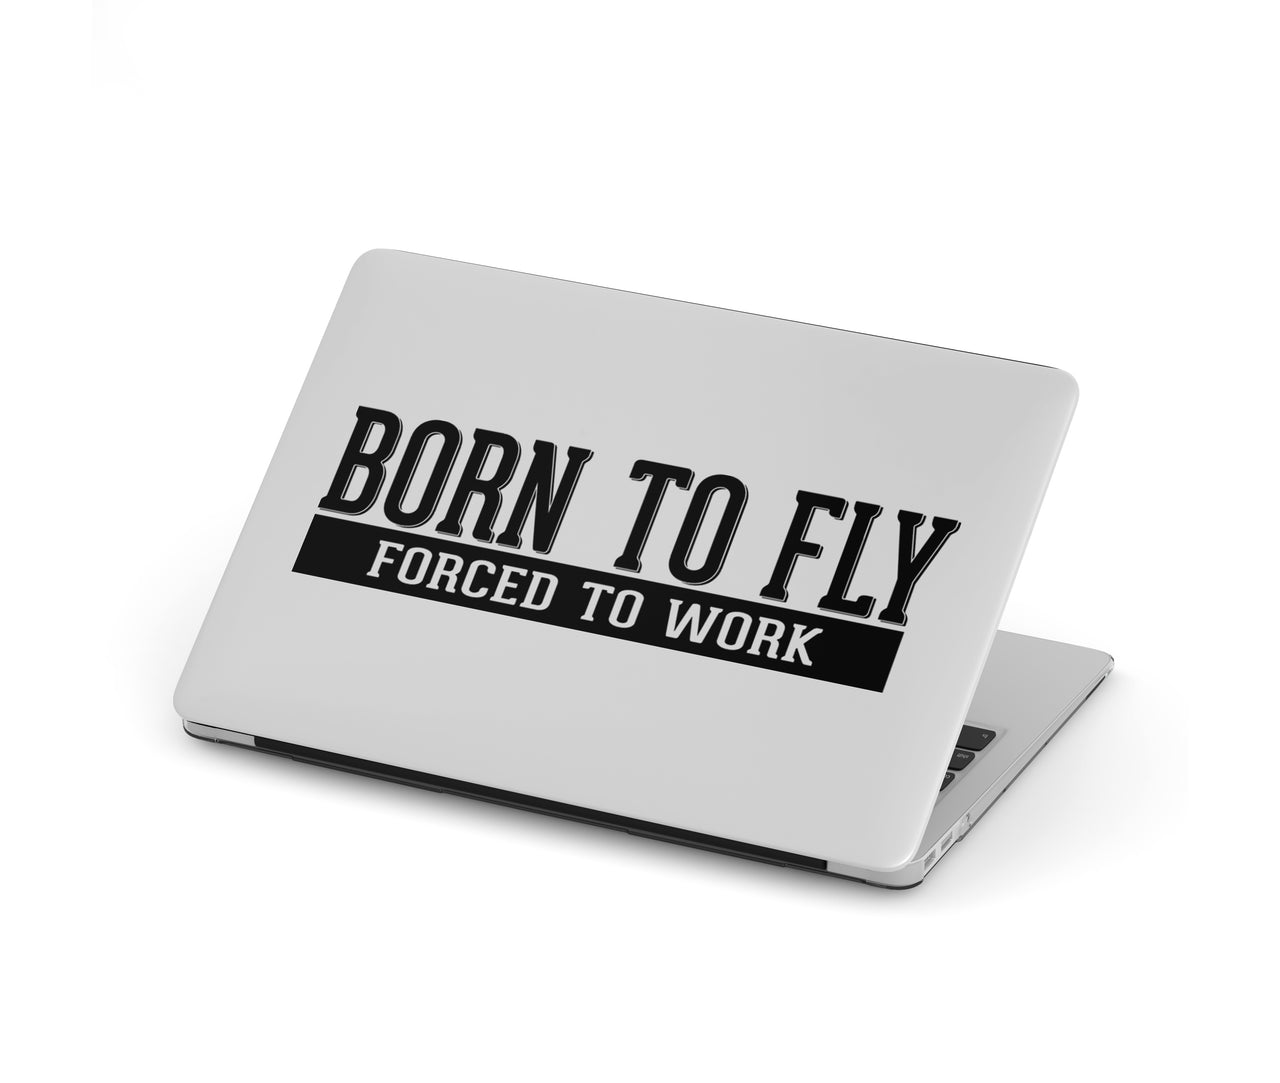 Born To Fly Forced To Work Designed Macbook Cases